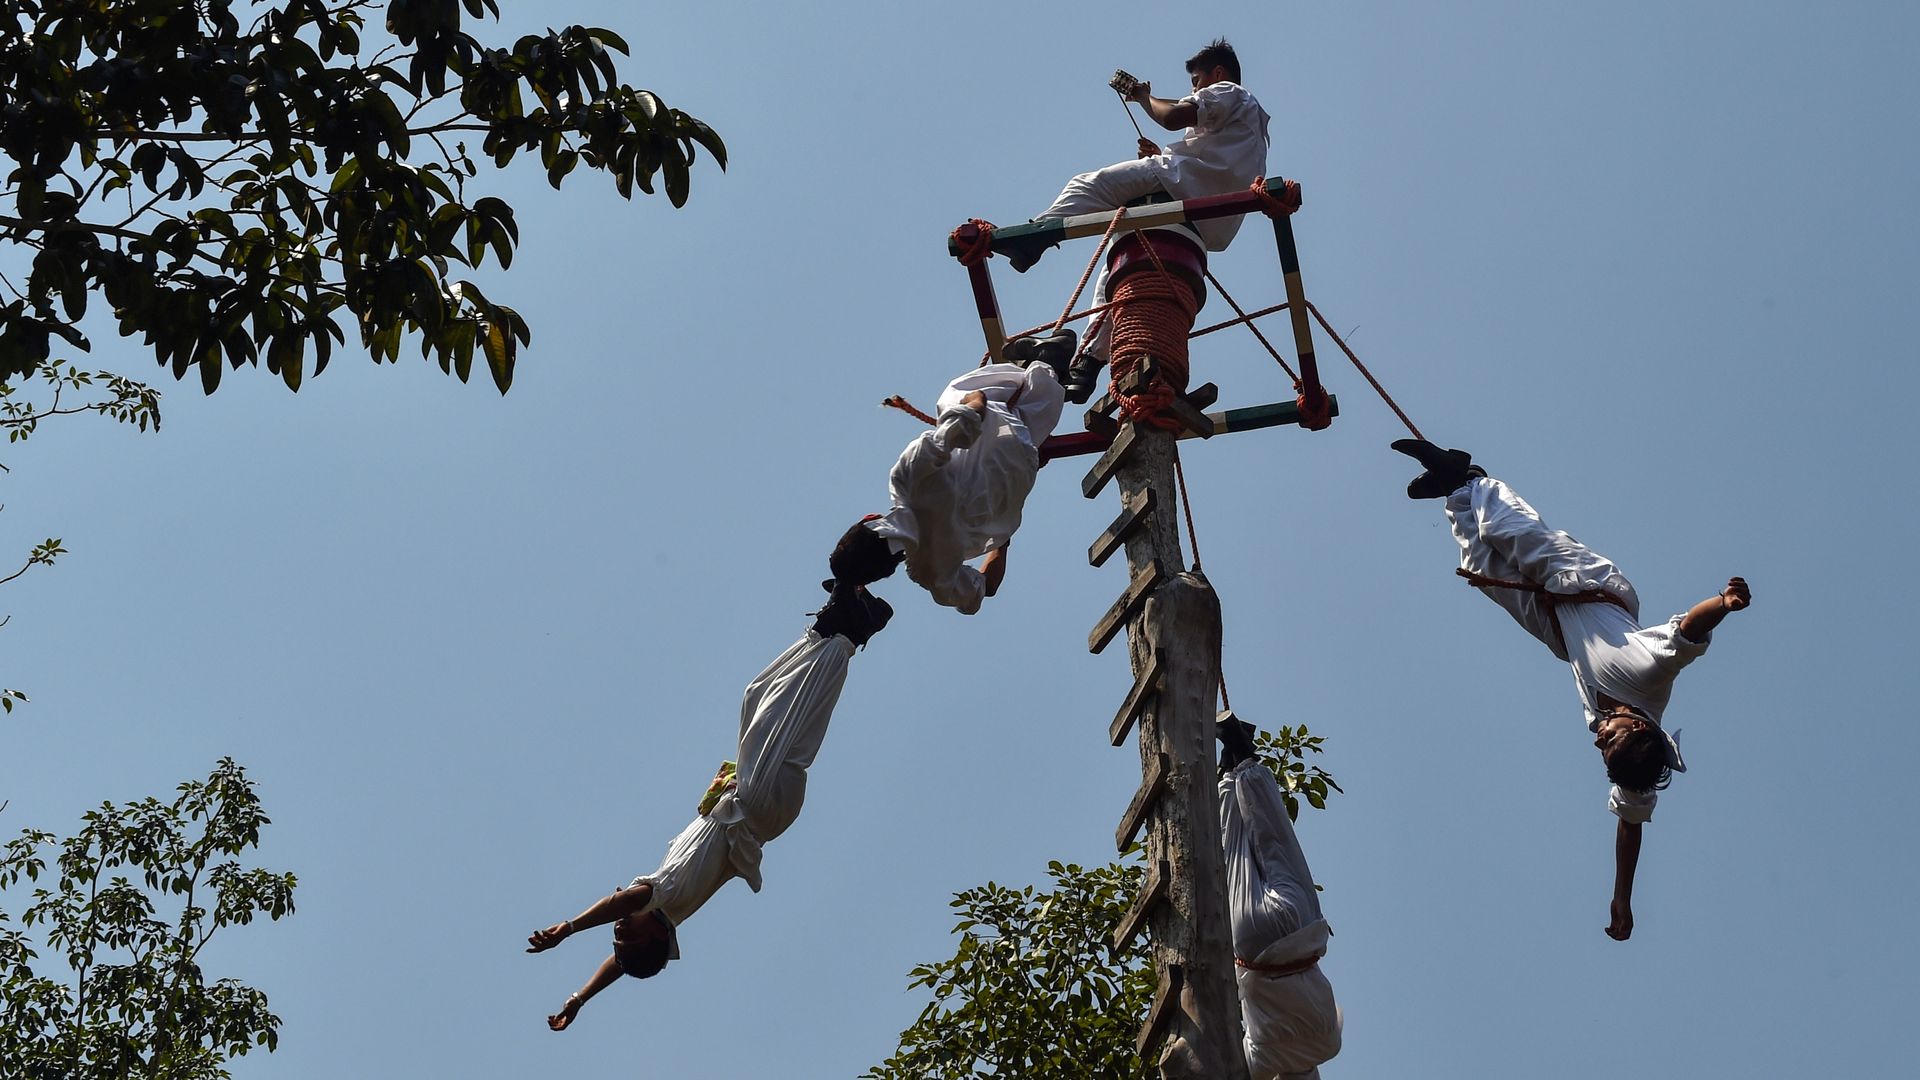 Young Totonac natives attend a training session for ""Danza de los Voladores" at Papantla Indigenous Arts Centre, ahead of the Tajin Summit Festival -aimed at preserving the Totonac legacy- in Mexico.